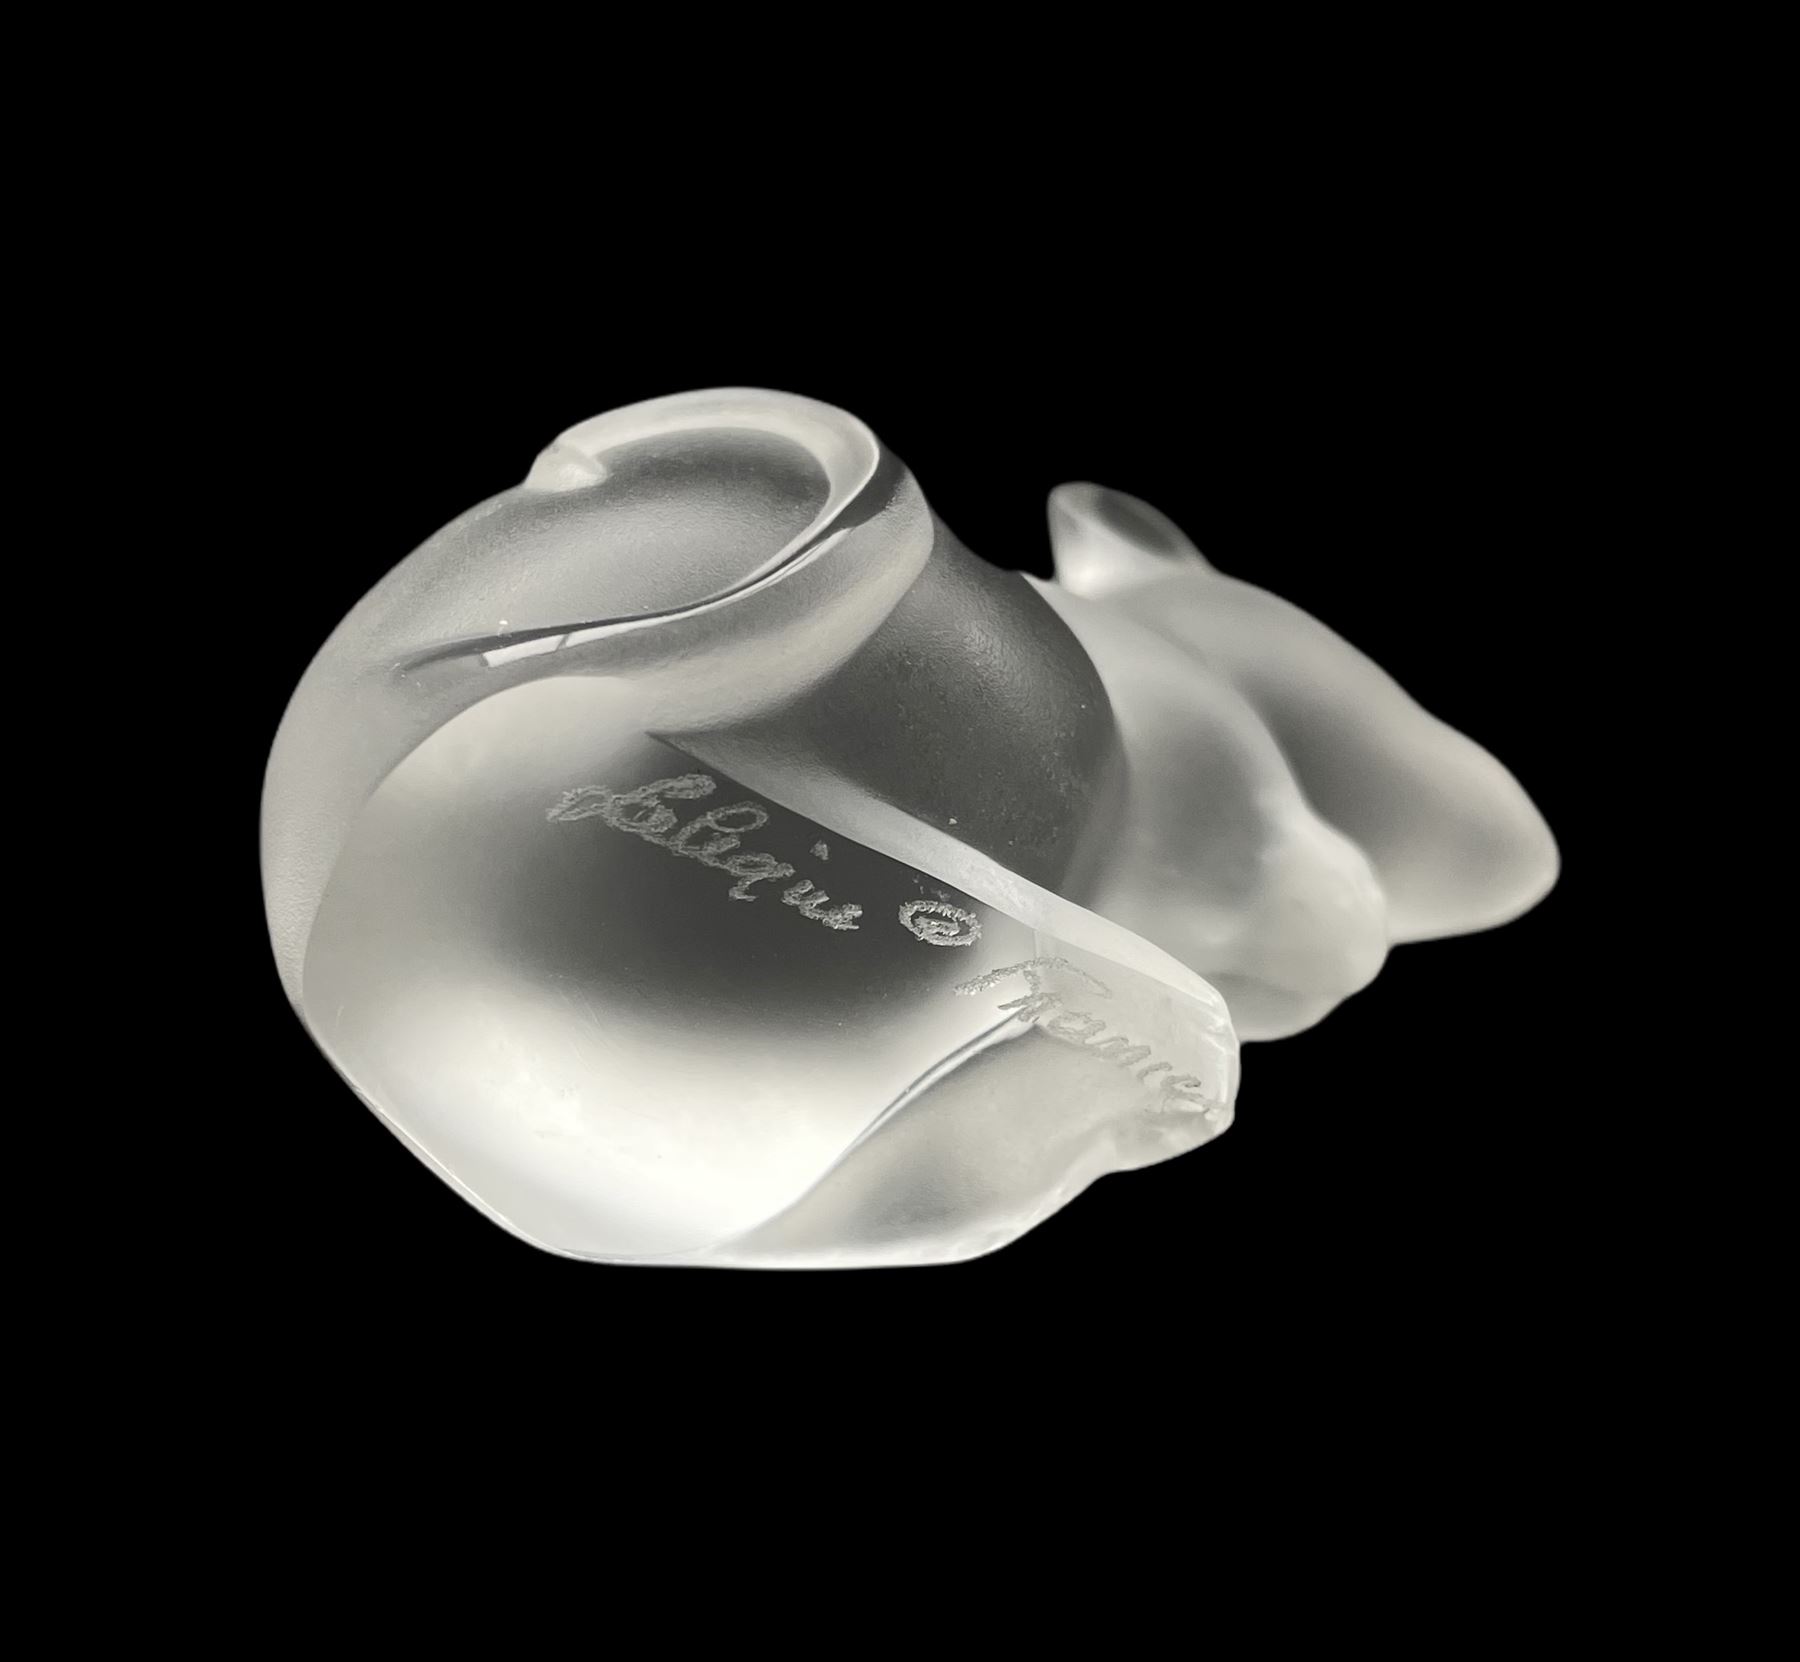 Lalique frosted glass model of a Mouse - Image 3 of 3